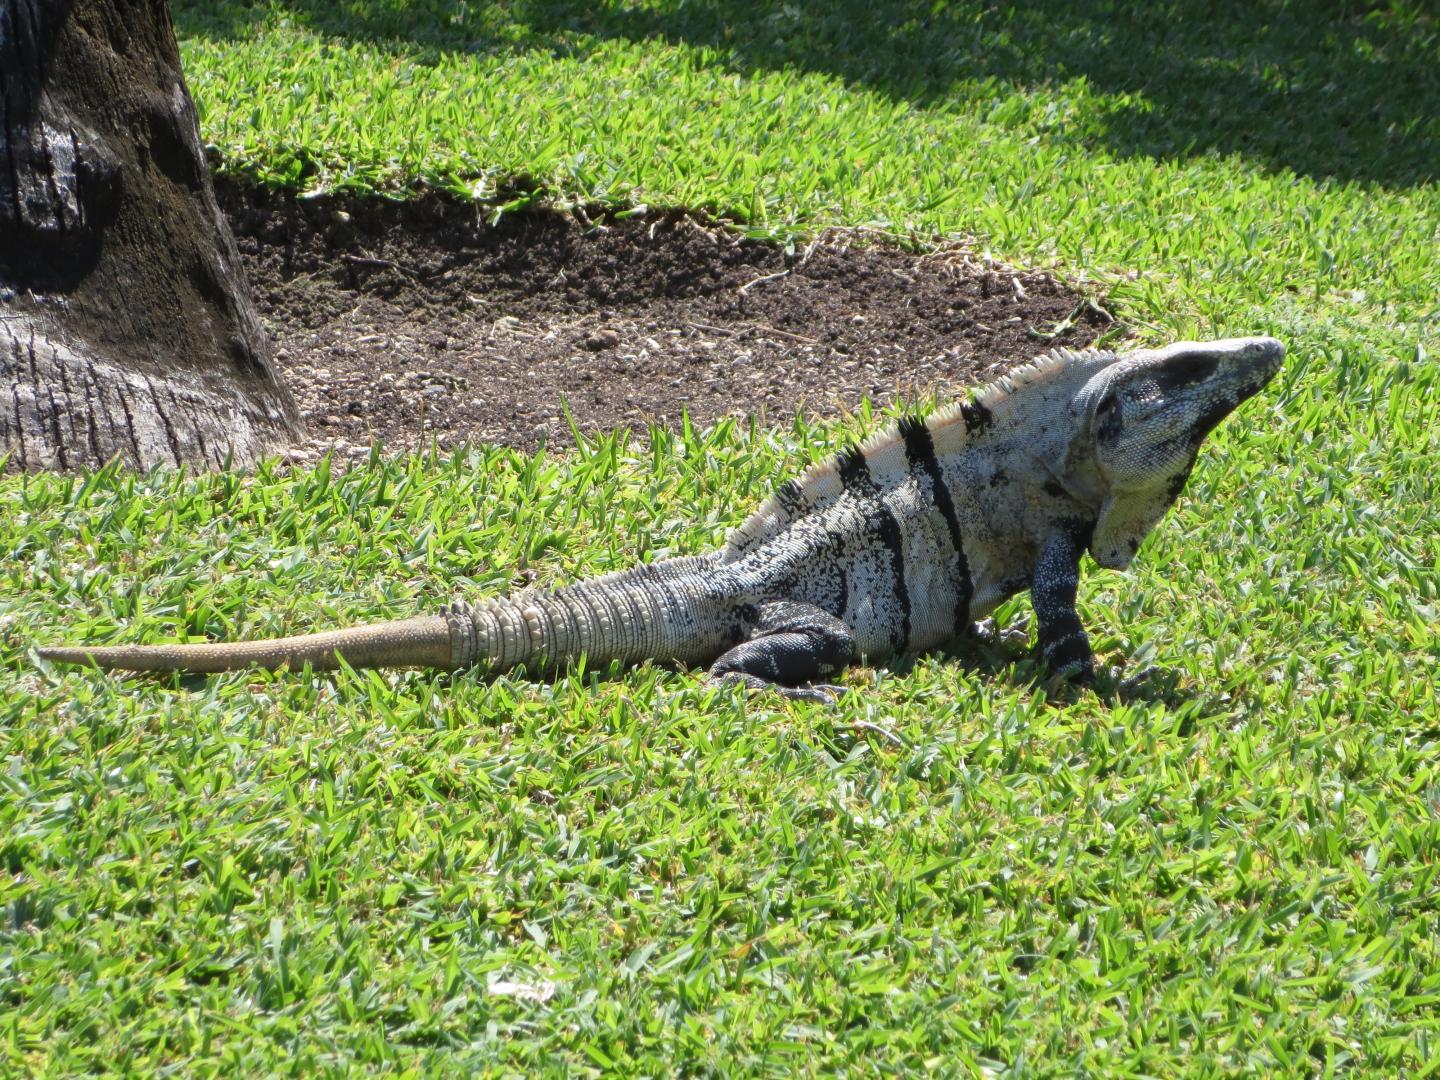 Modern Reptile with Ability to Drop Tail